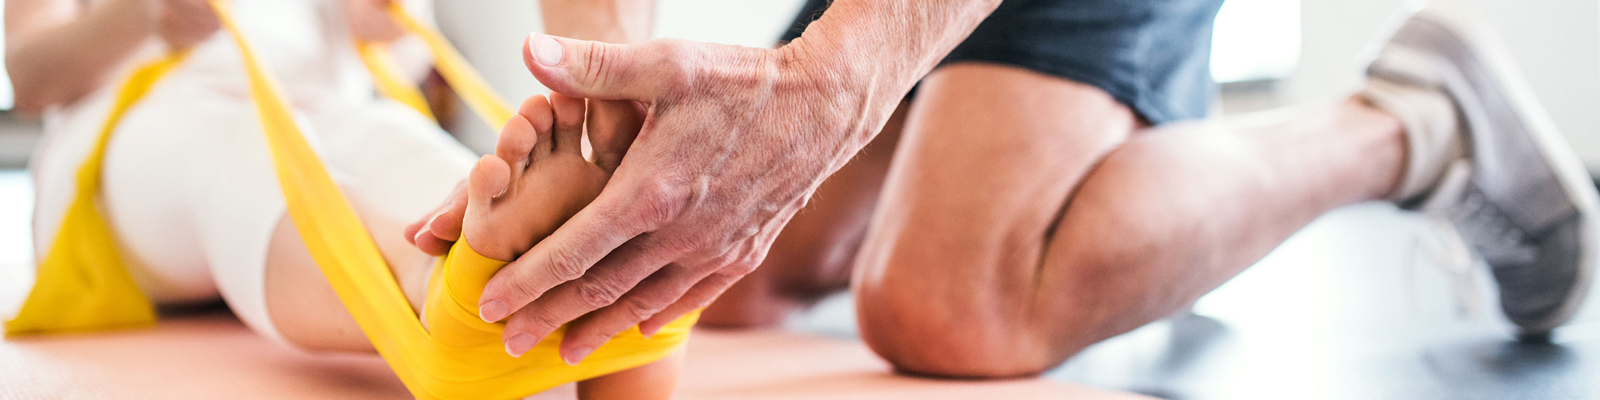 How can physical therapy help?